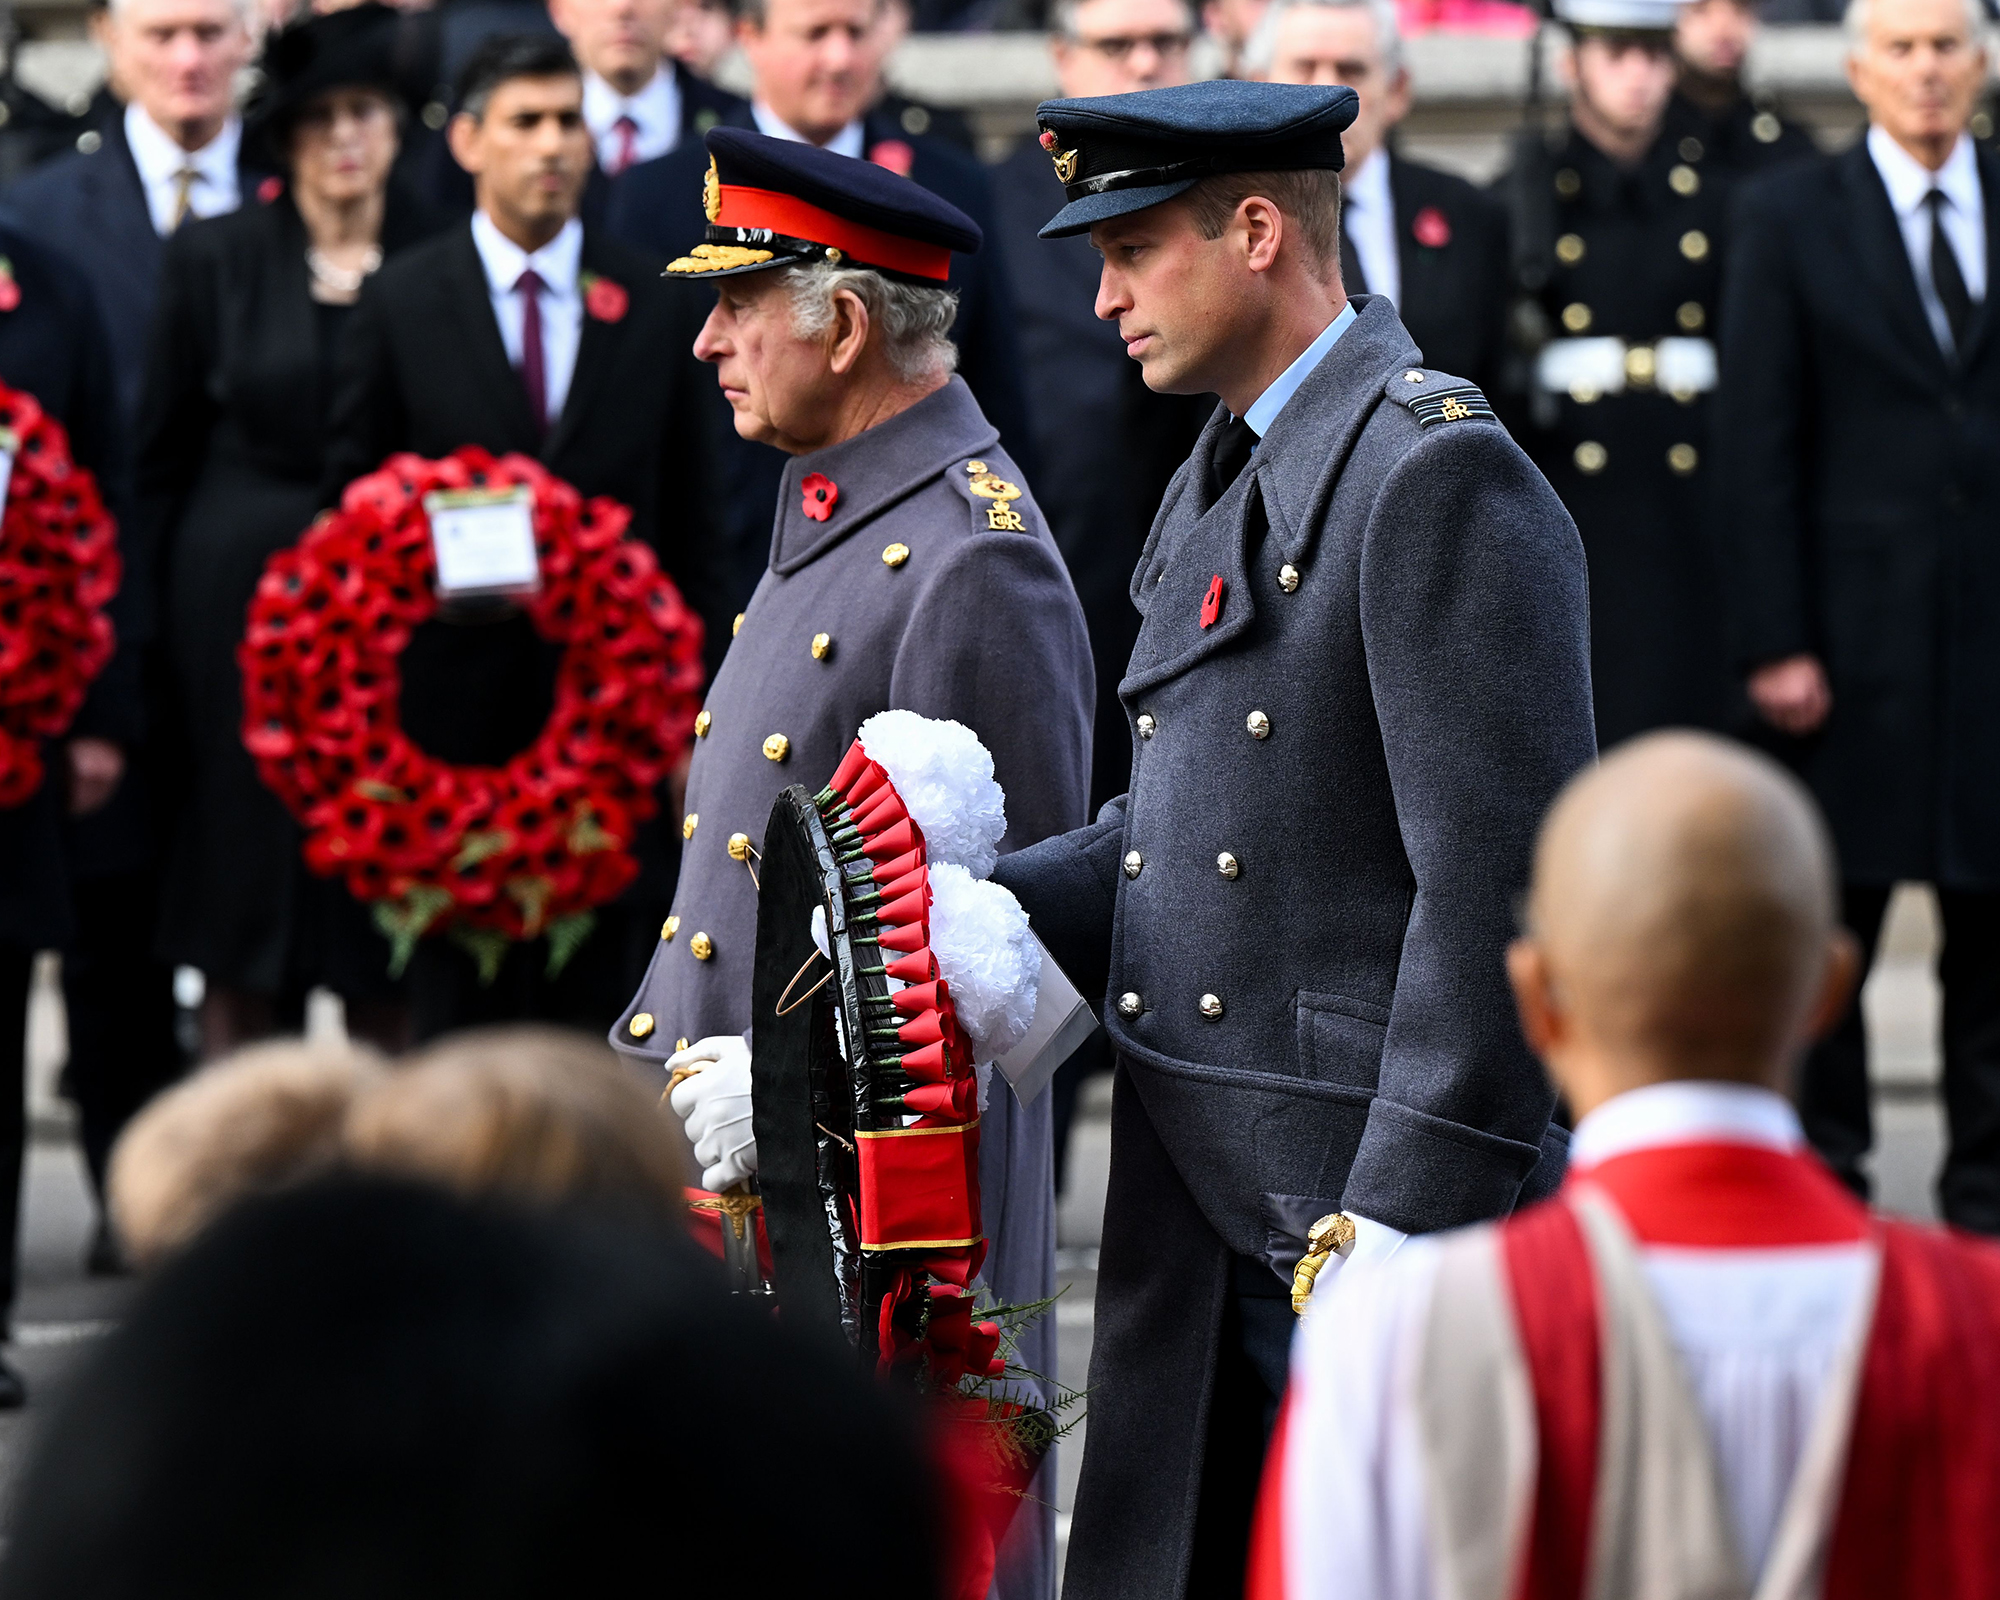 King Charles III, Prince William, More Attend Remembrance Service 